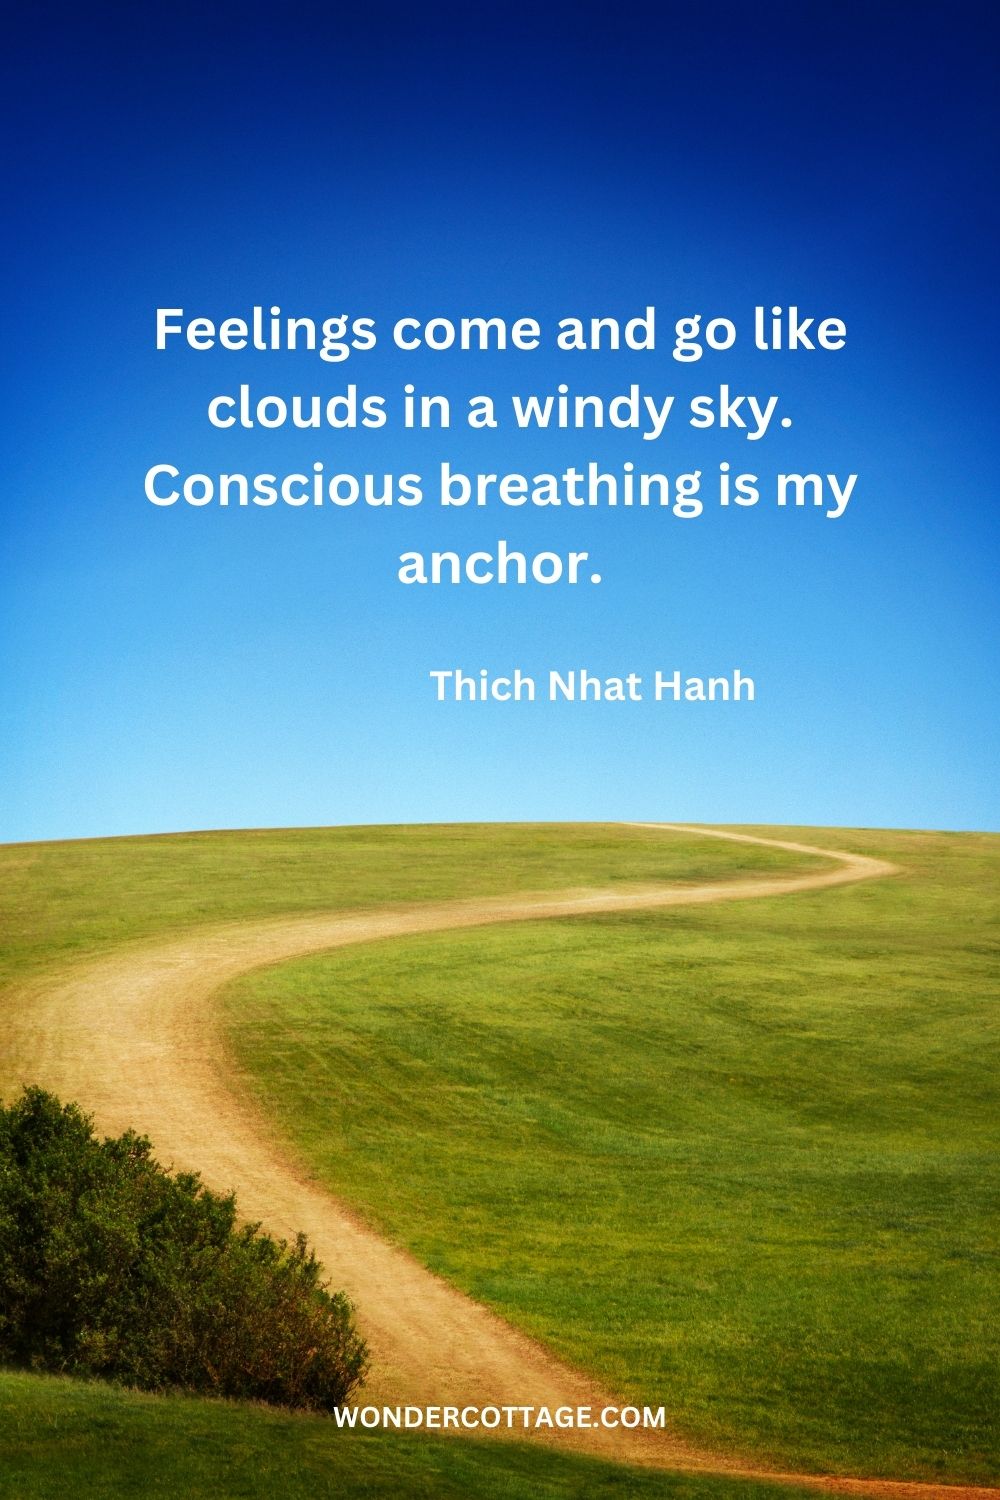 Feelings come and go like clouds in a windy sky. Conscious breathing is my anchor. Thich Nhat Hanh